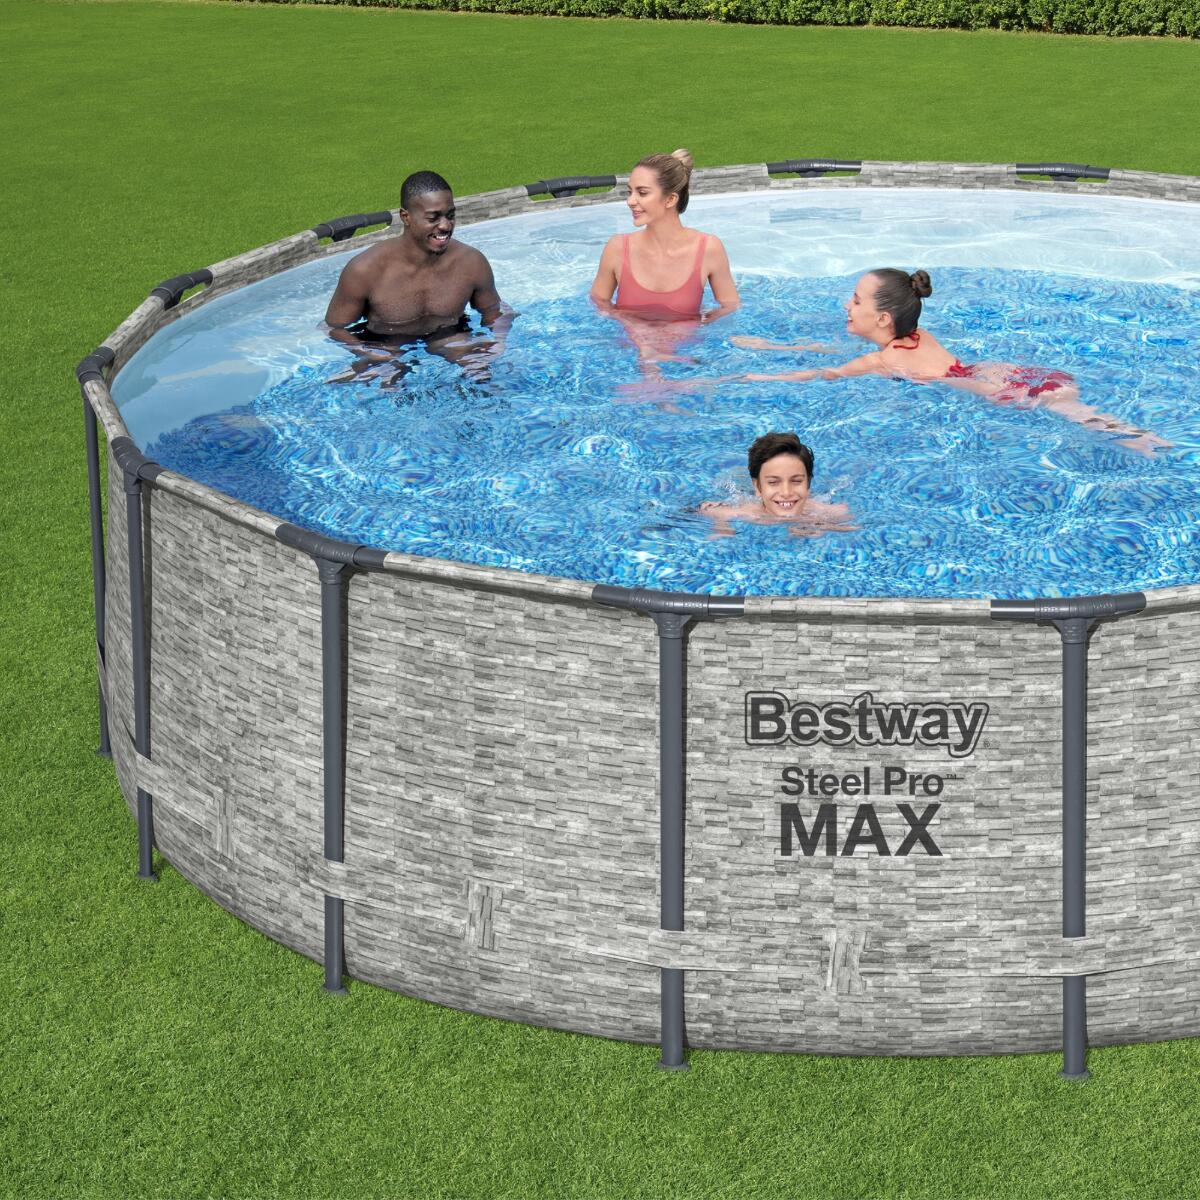 Bestway 16ft x 48" Steel Pro MAX Round Above Ground Swimming Pool 2/7